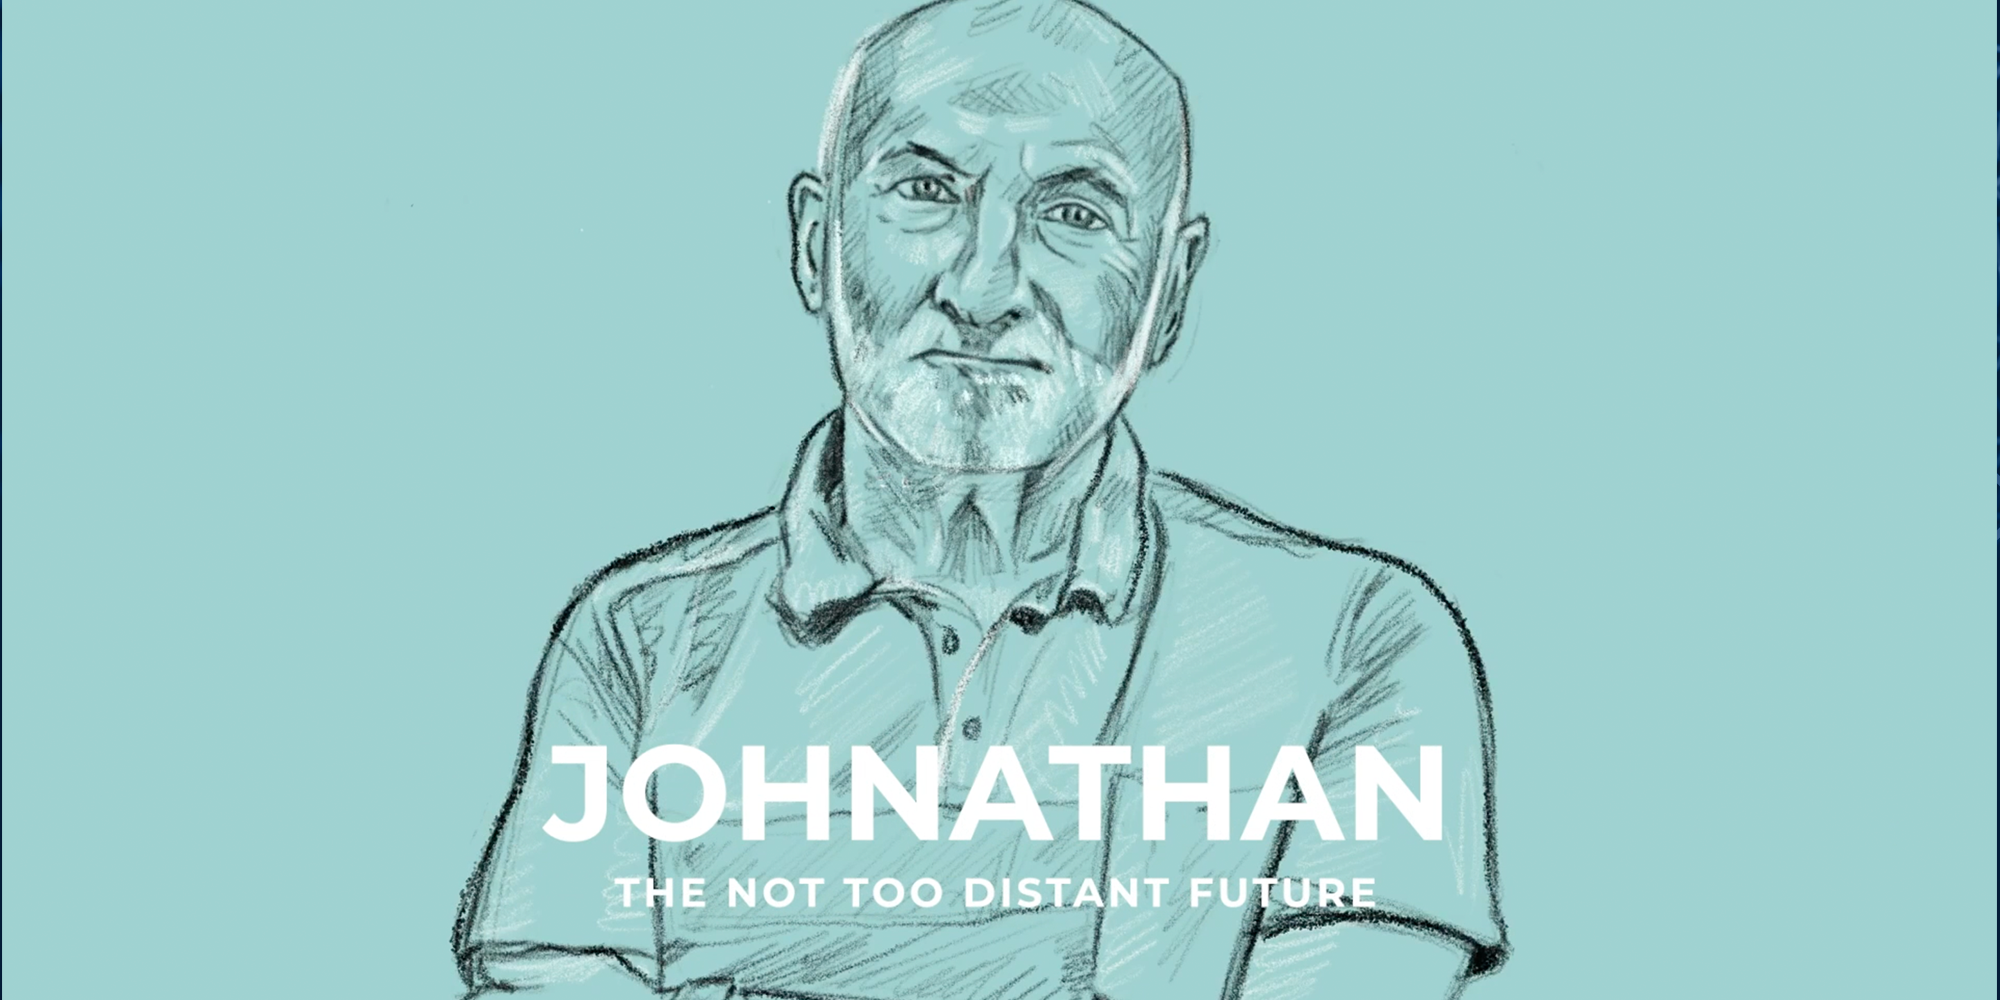 Pencil drawing of a man in his late 60s wearing a polo shirt with short white beard, text says 